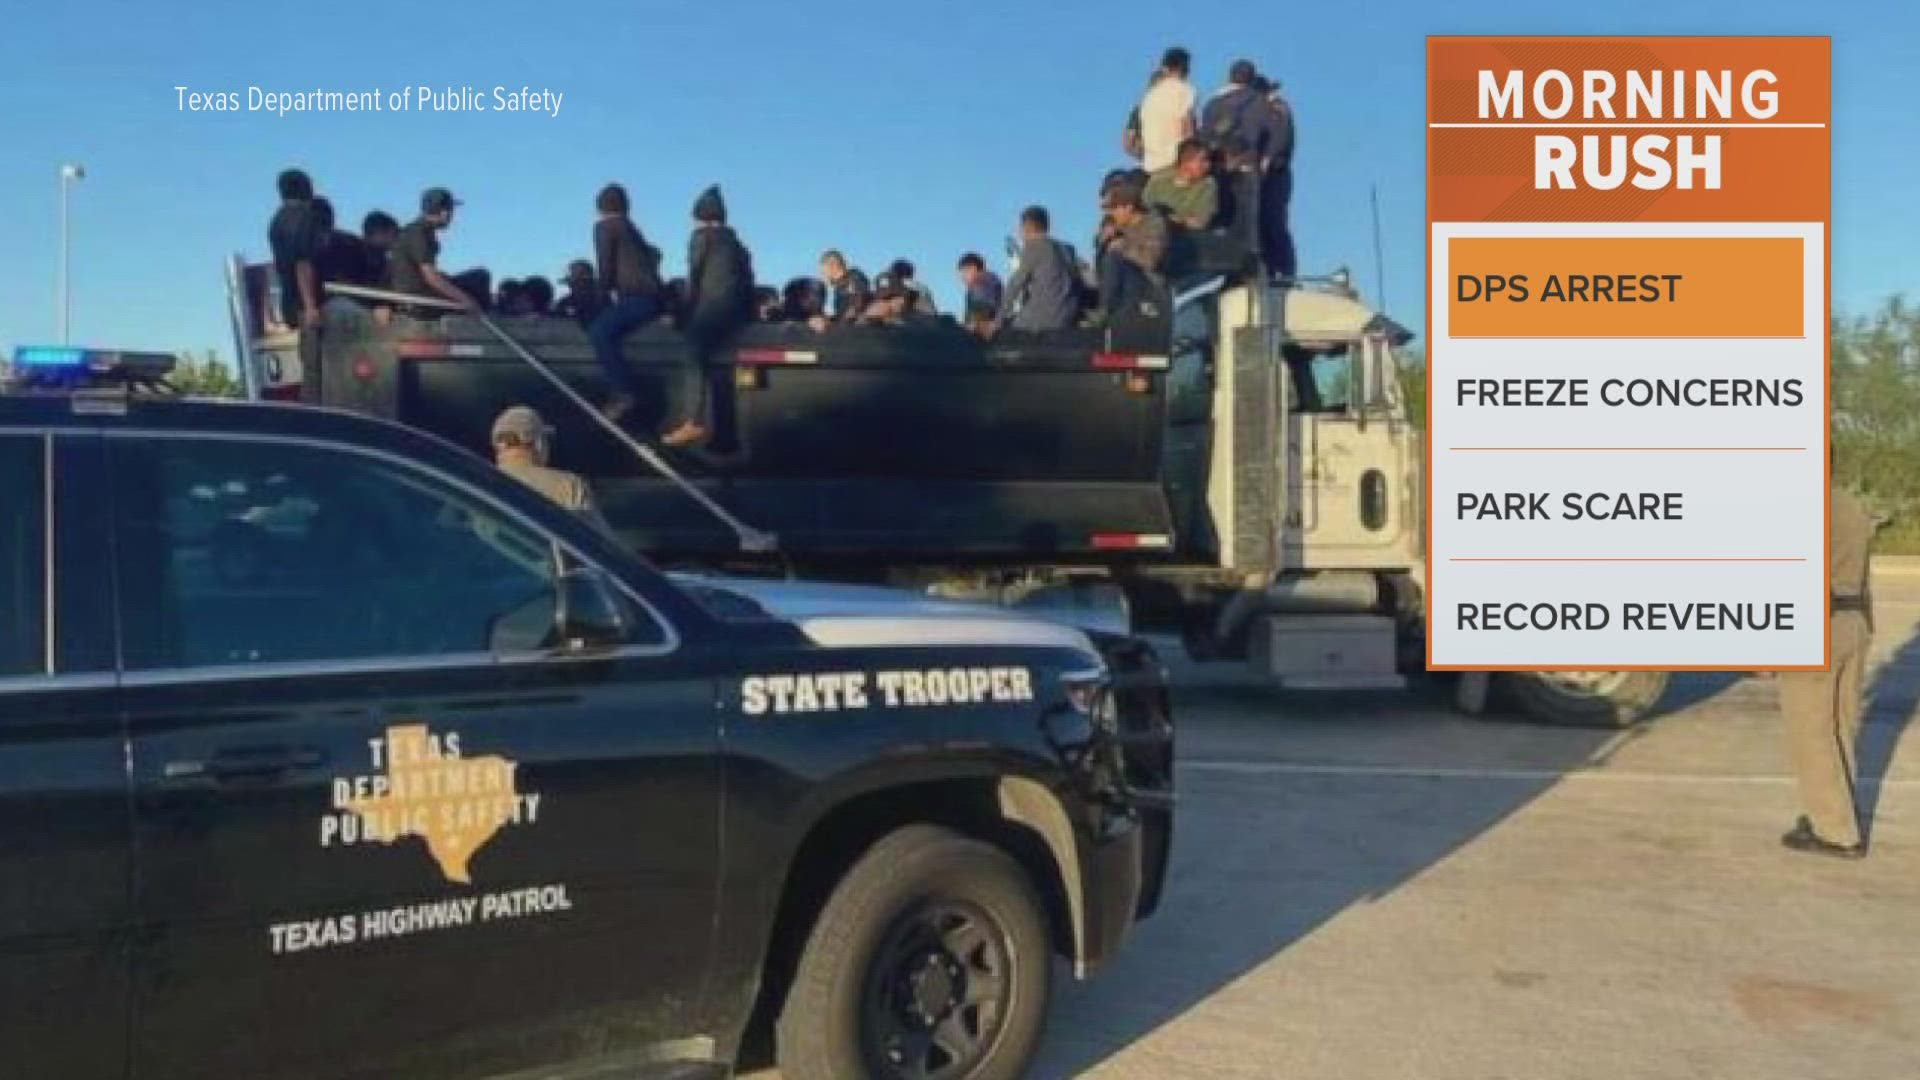 He was stopped on I-35 between the U.S.-Mexico border and San Antonio, DPS officials said.